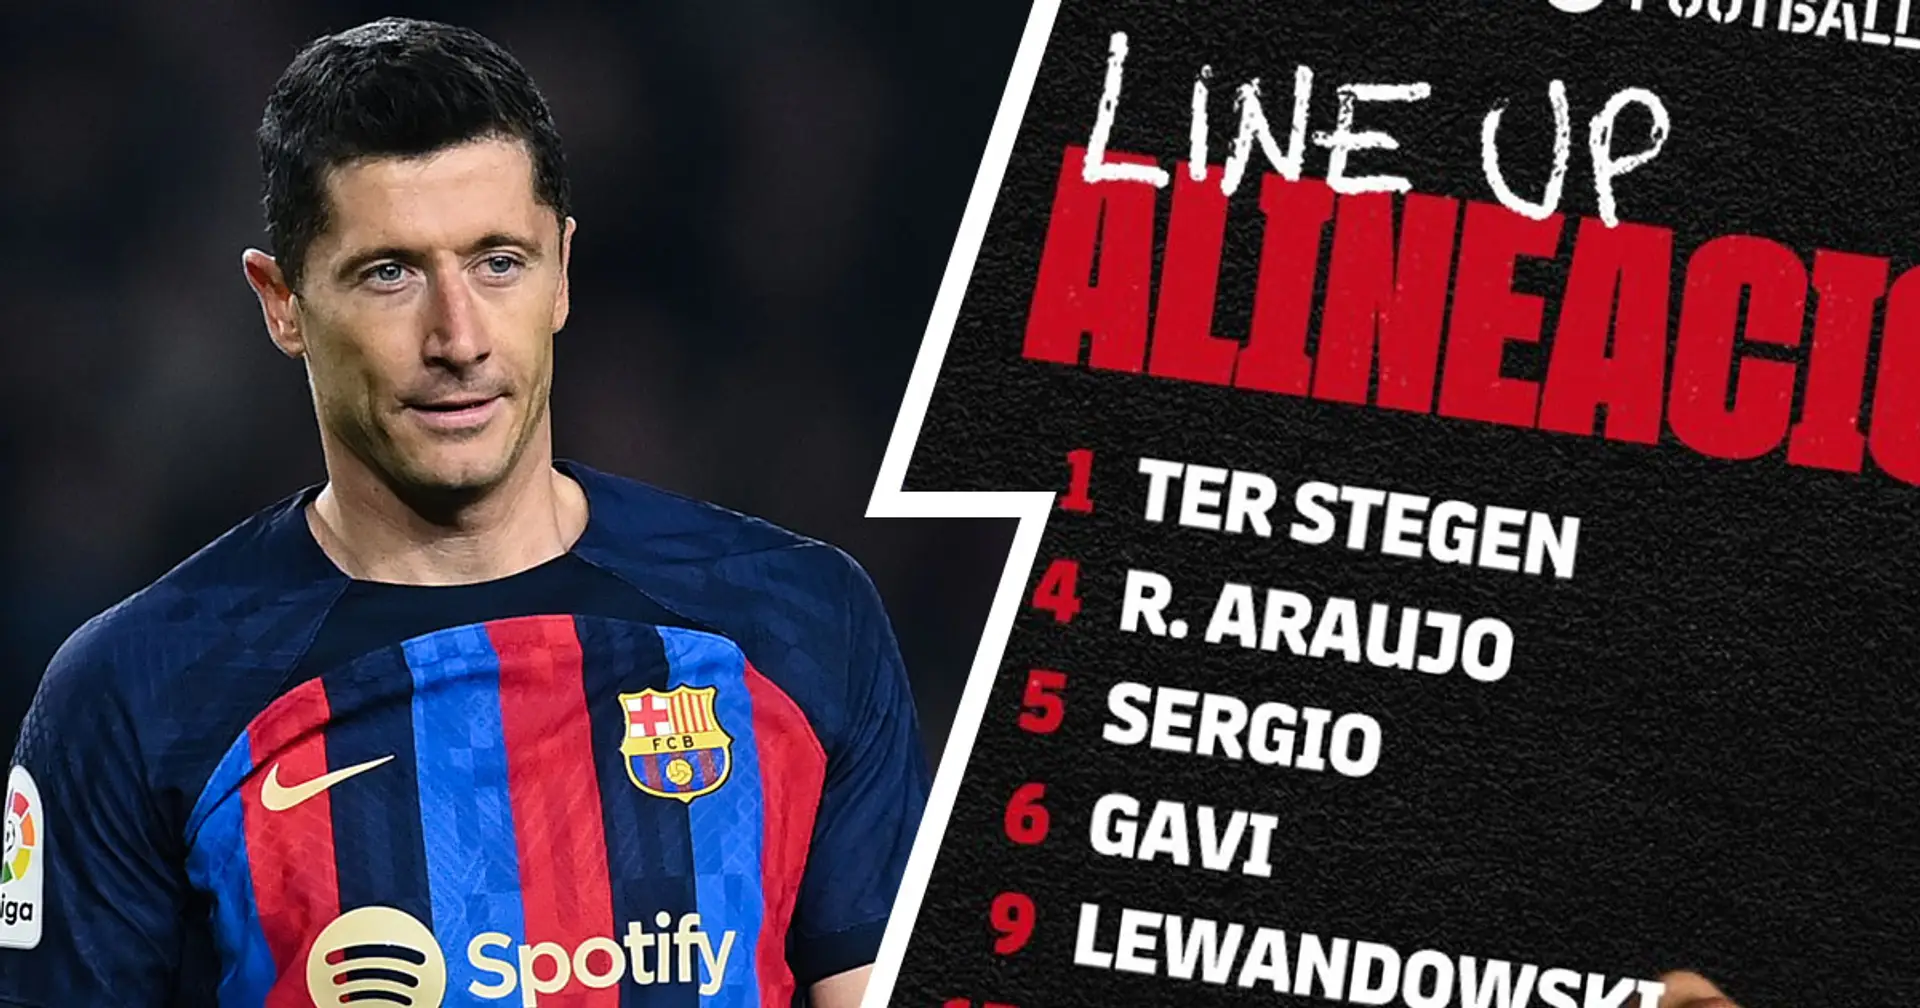 OFFICIAL: Barcelona XI v Real Madrid unveiled